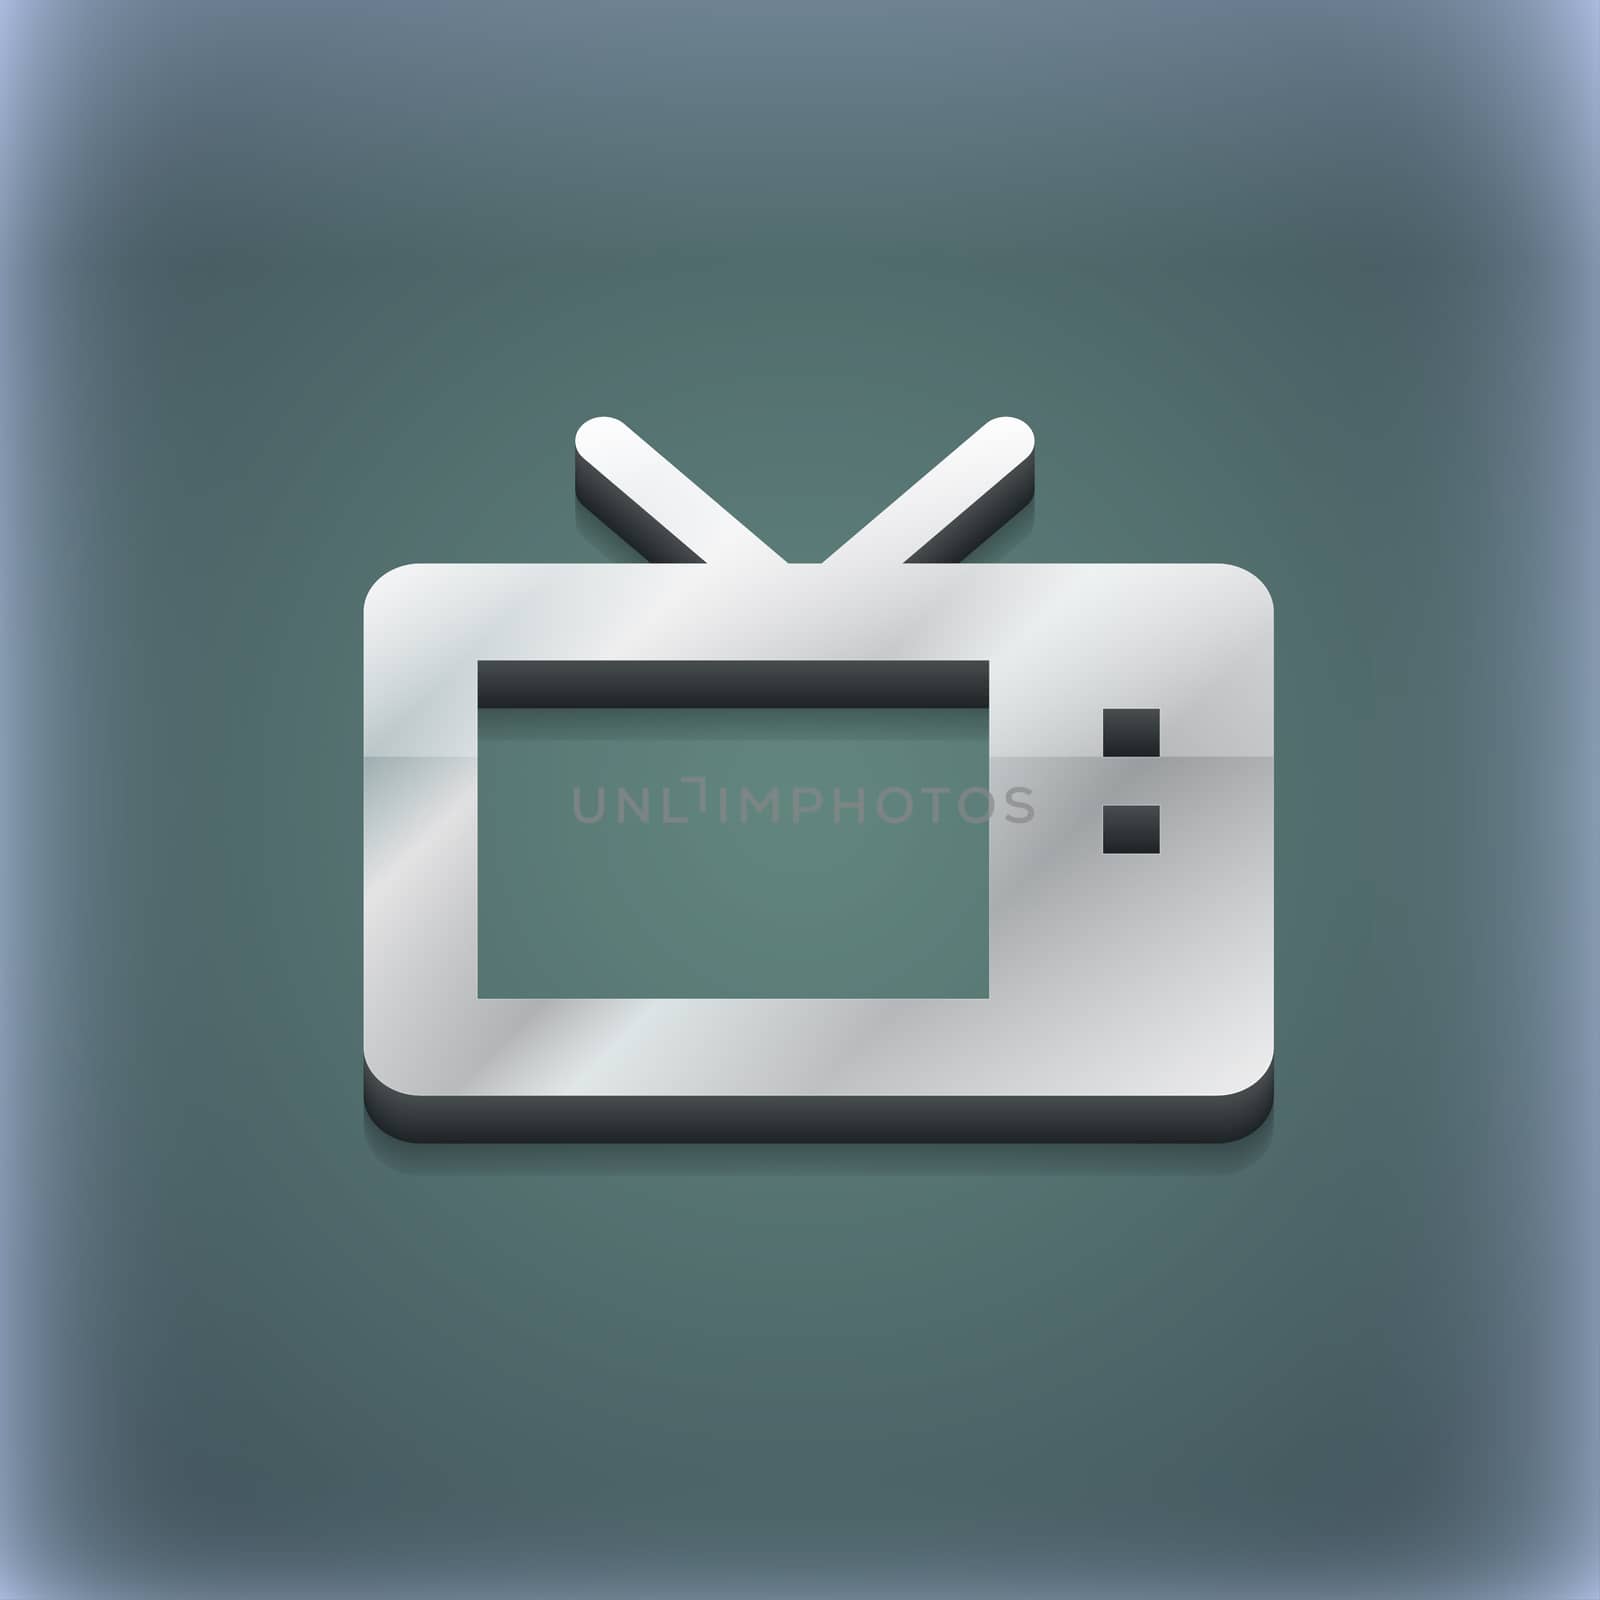 Retro TV mode icon symbol. 3D style. Trendy, modern design with space for your text illustration. Raster version